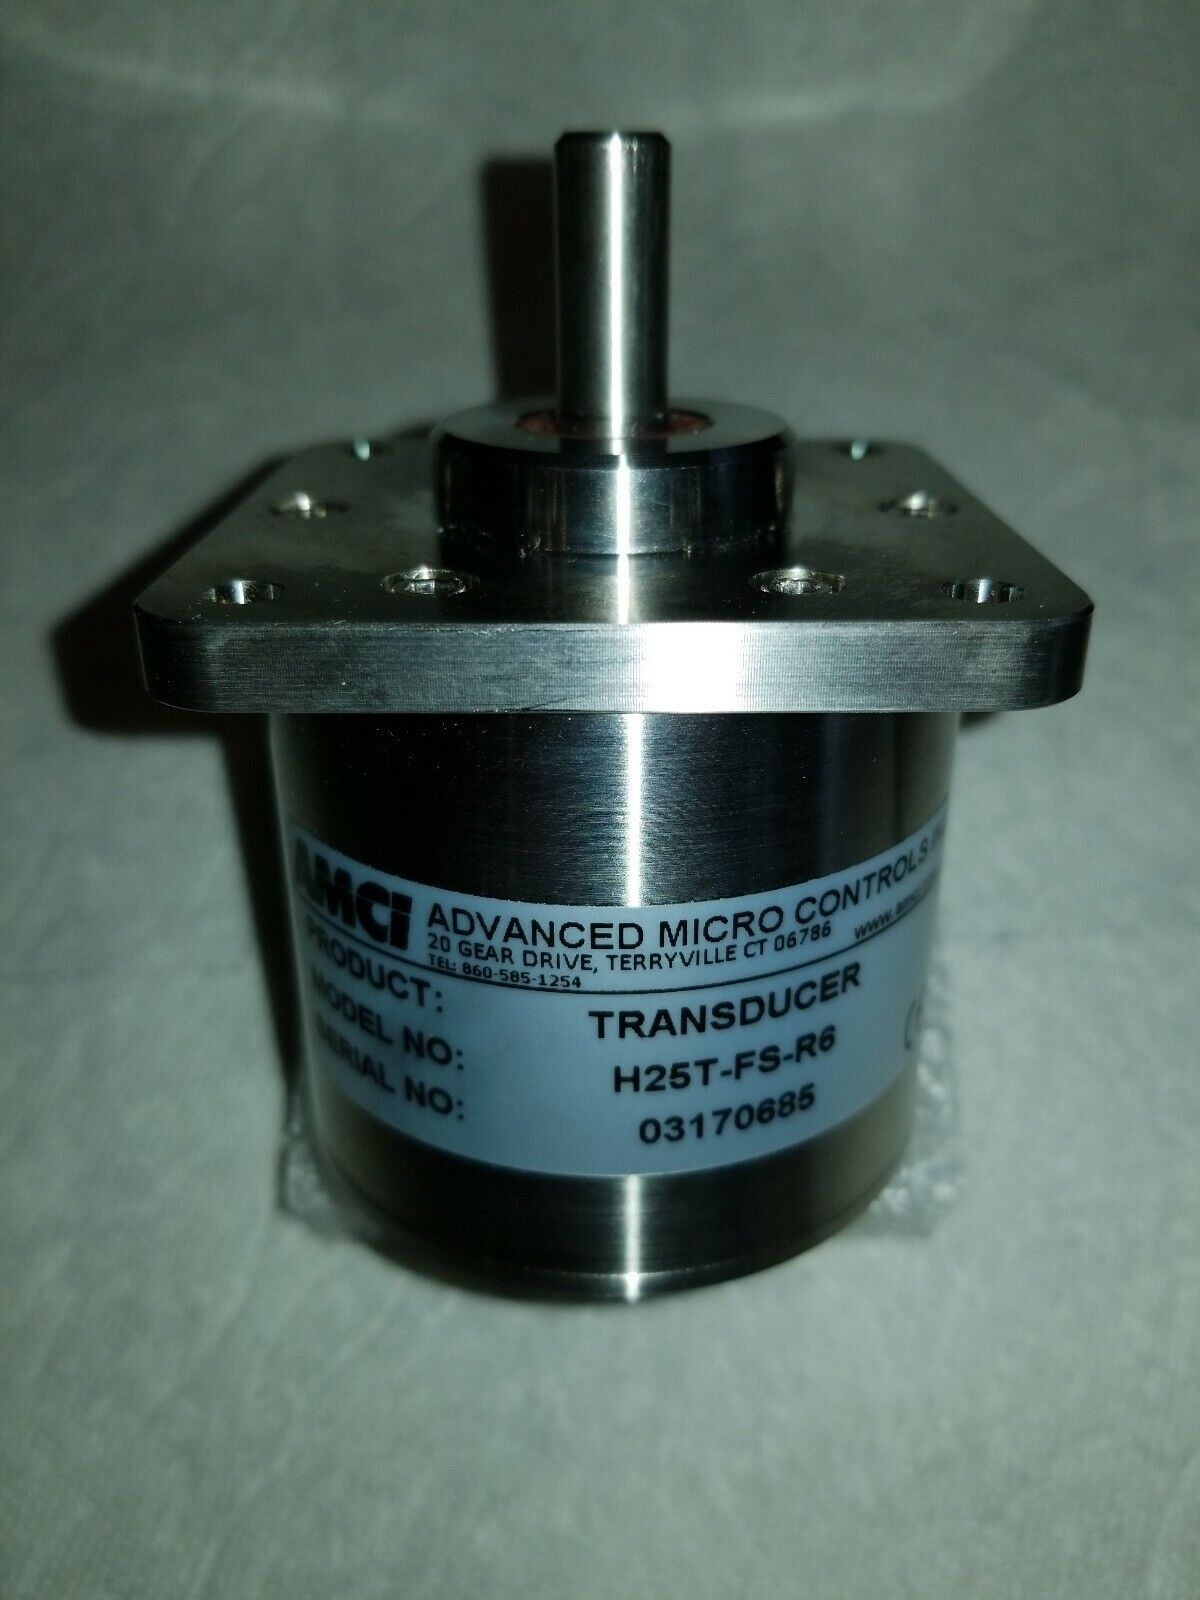 AMCI H25T-FS-R6 ROTARY TRANSDUCER Stainless. New open box